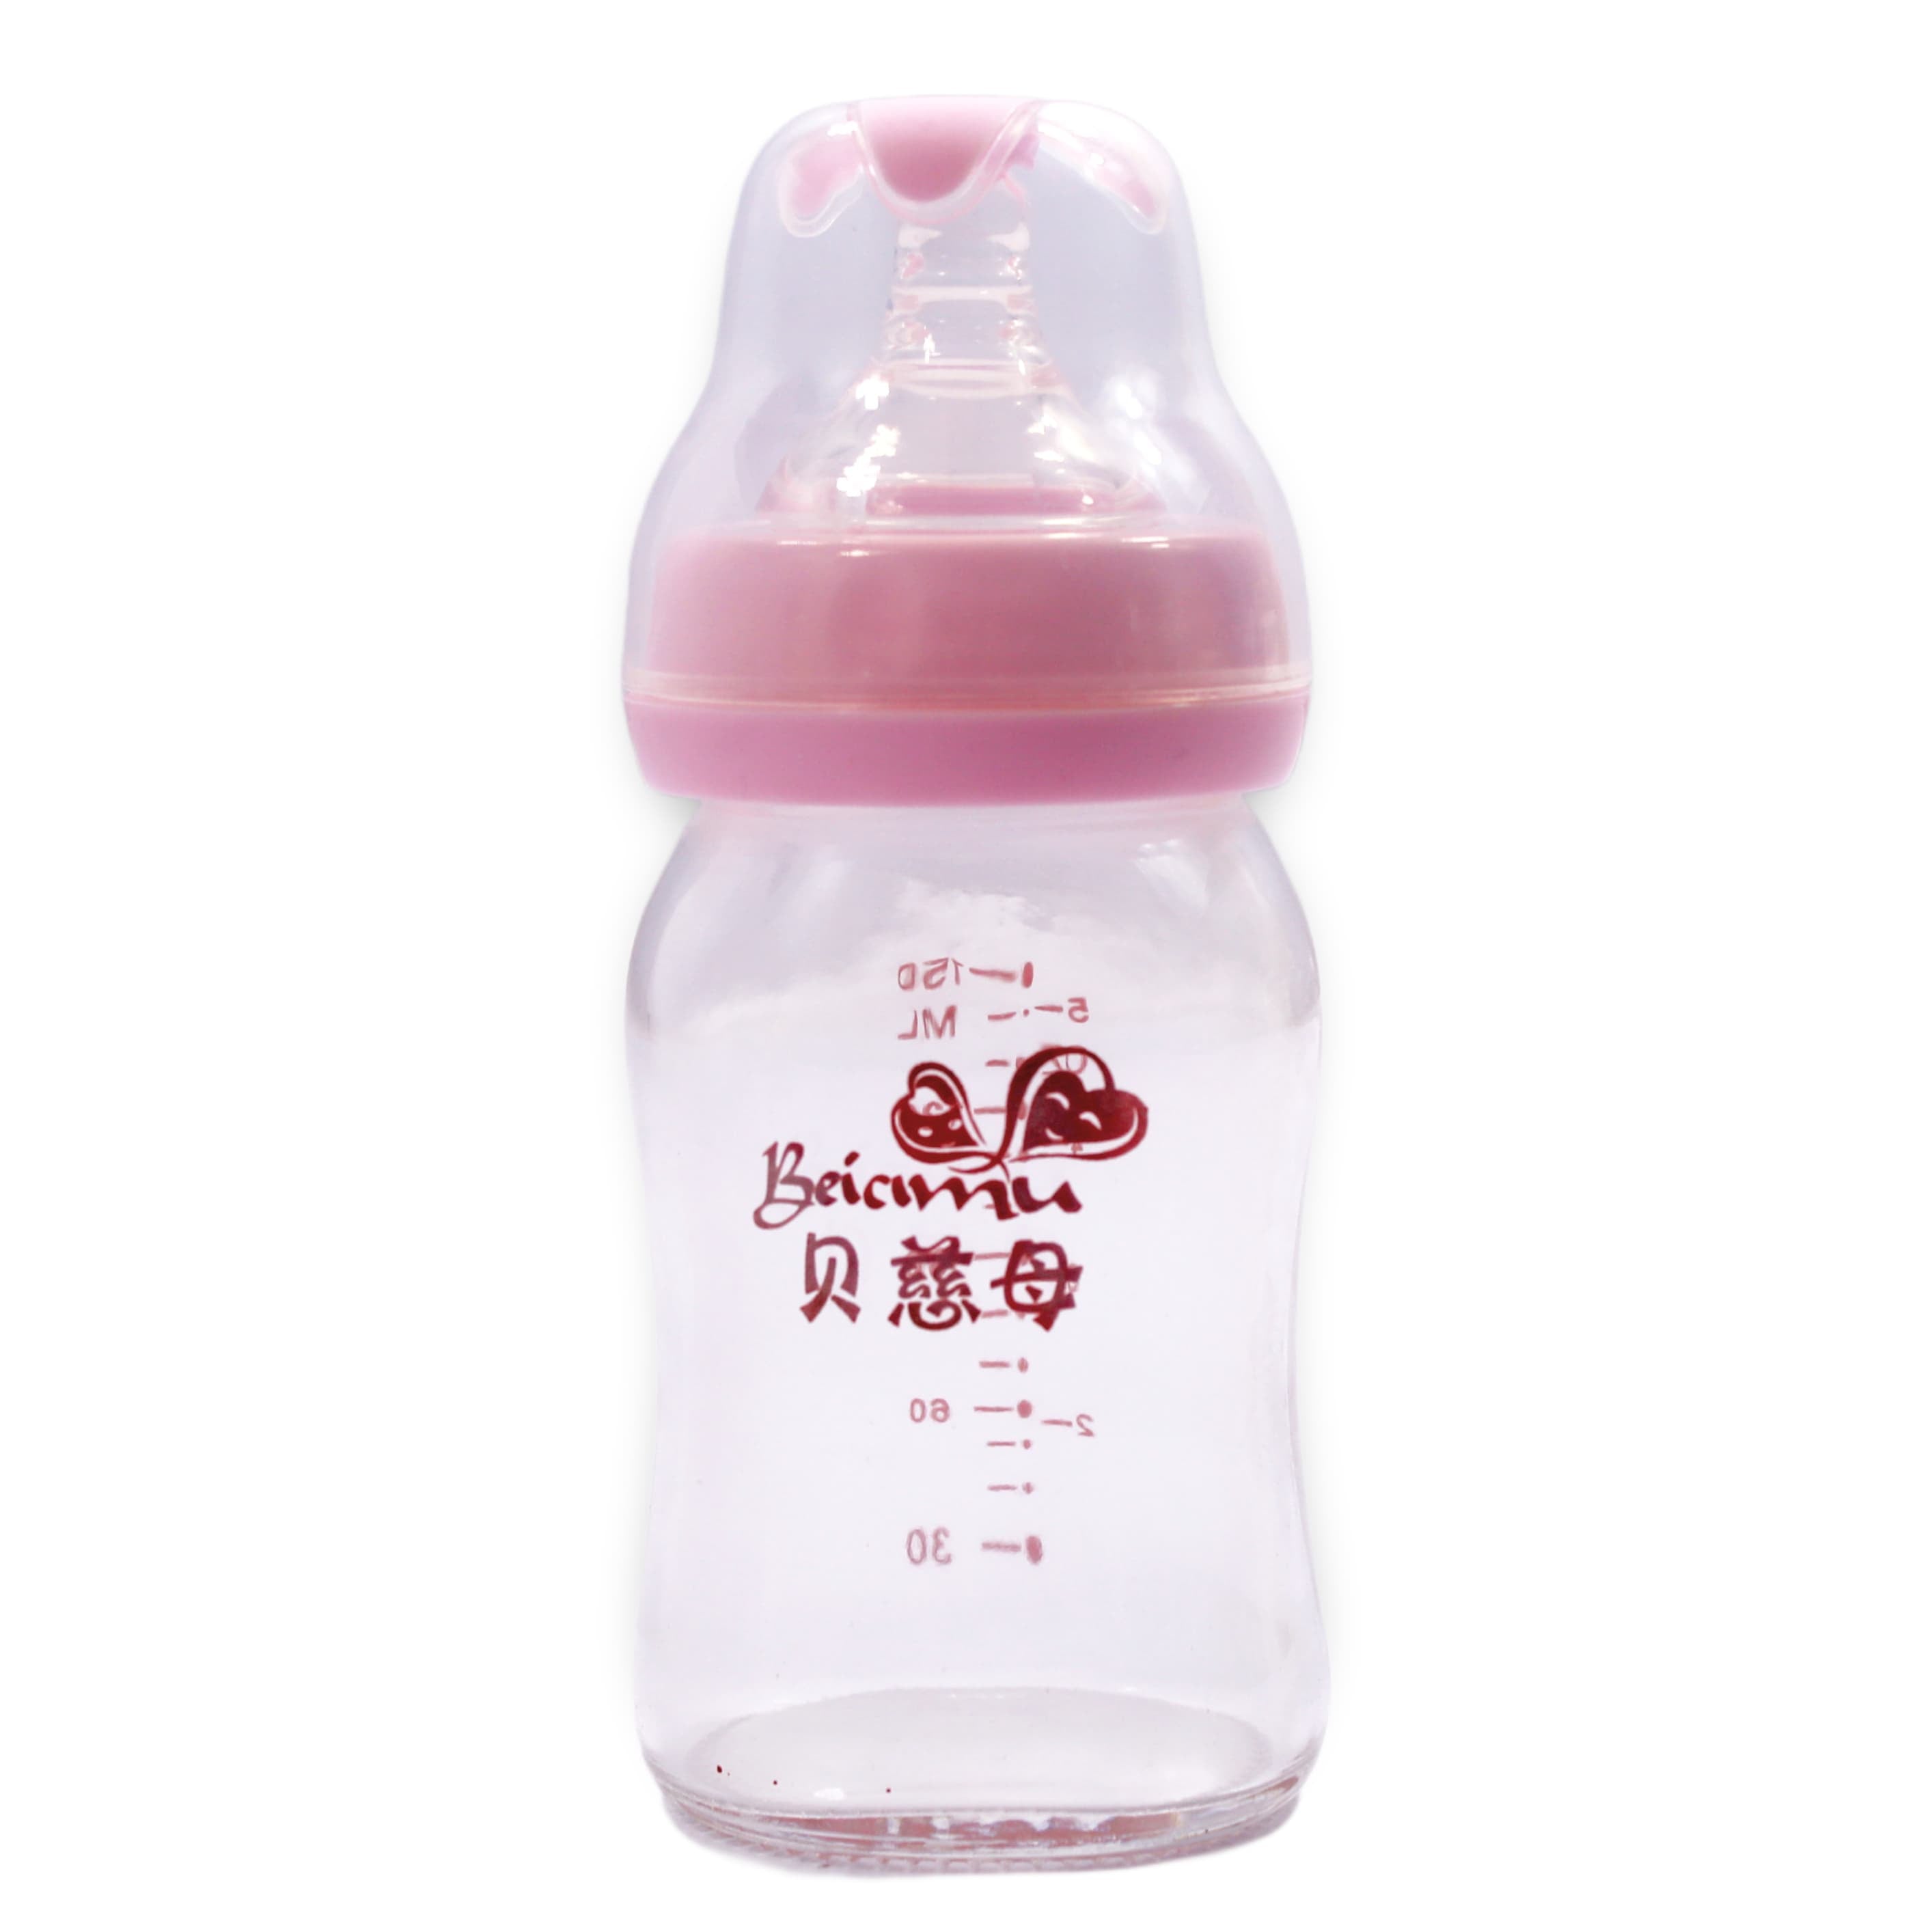 FEEDER FOR BABY BEIAMU STRONG BABY BOTTLE